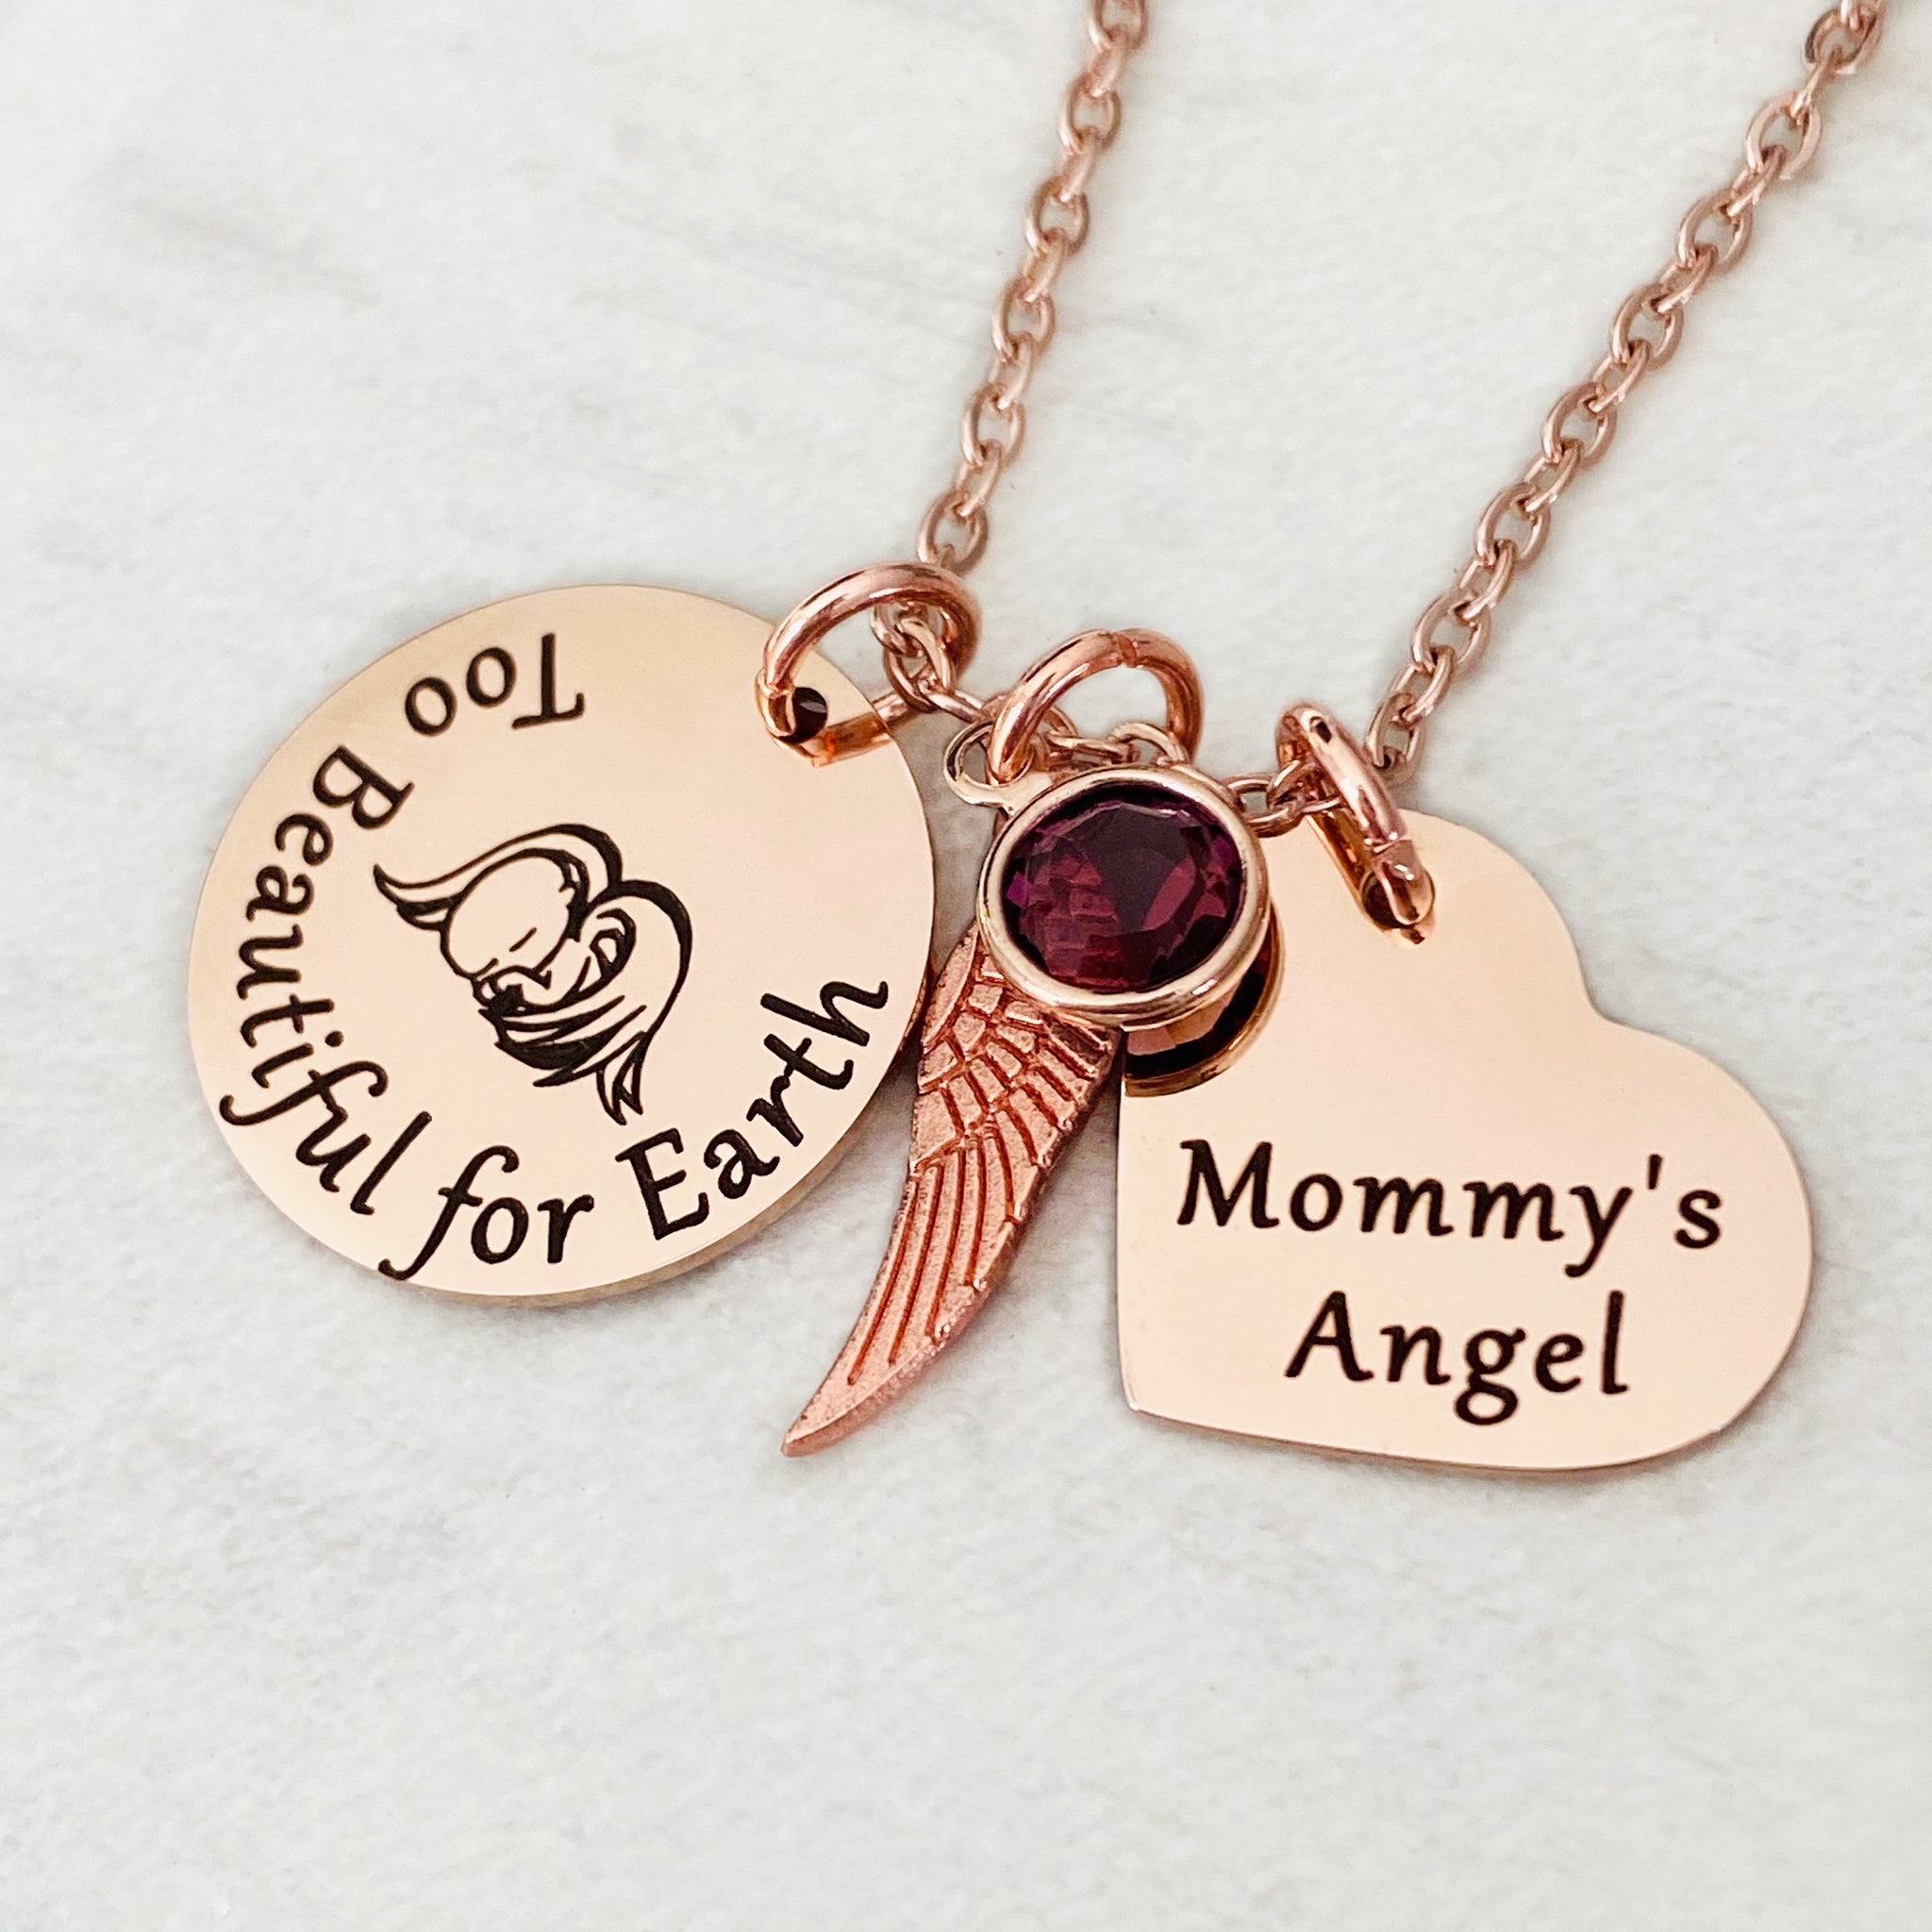 Copper Jewelry - Necklaces - Page 1 - Earth Angel Heals